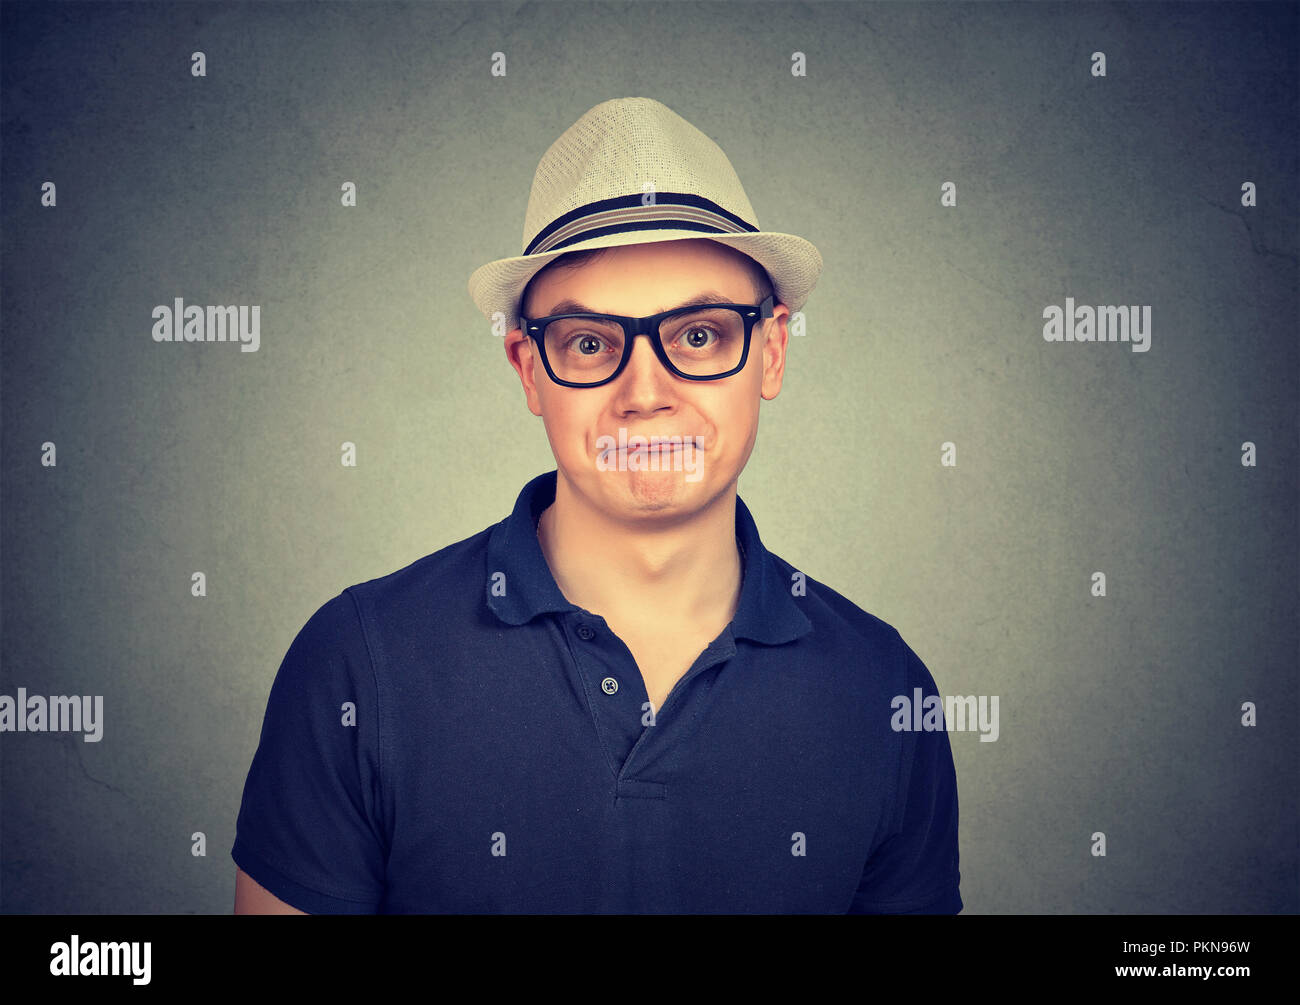 Young nerd man in eyeglasses and hat making eccentric face expression looking at camera Stock Photo